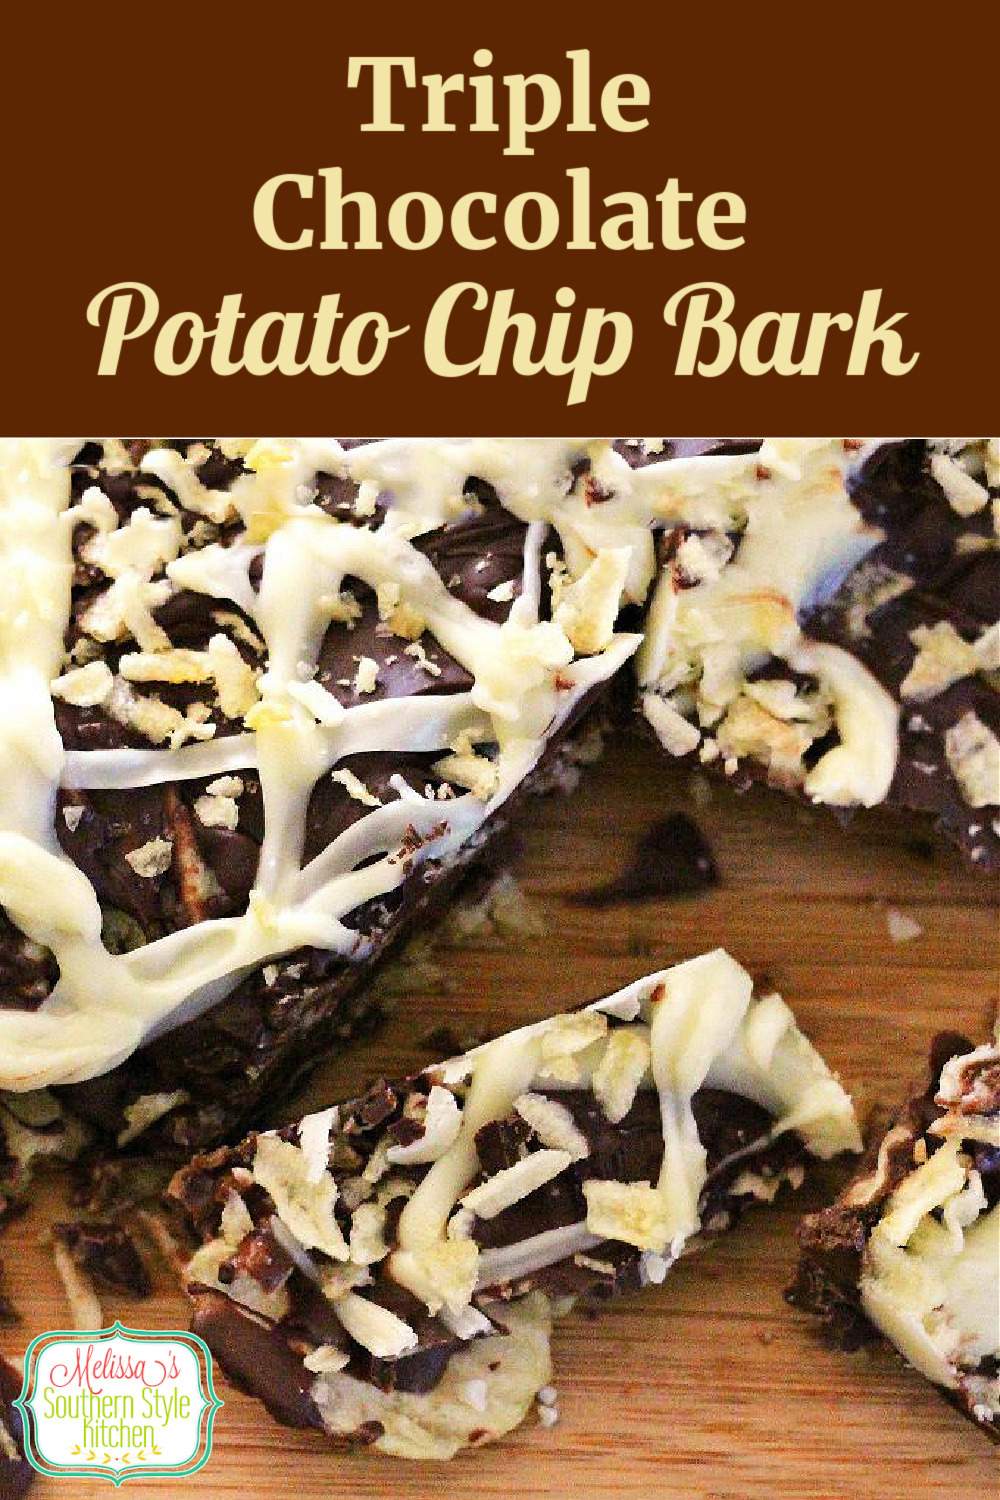 This Triple Chocolate Potato Chip Bark is a must-make for the sweet and salty fans in your life #potatochips #potatochipbark #candybarkrecipes #triplechocolate #candy #chocolatebark #chocolatedippedpotatochipsrecipe